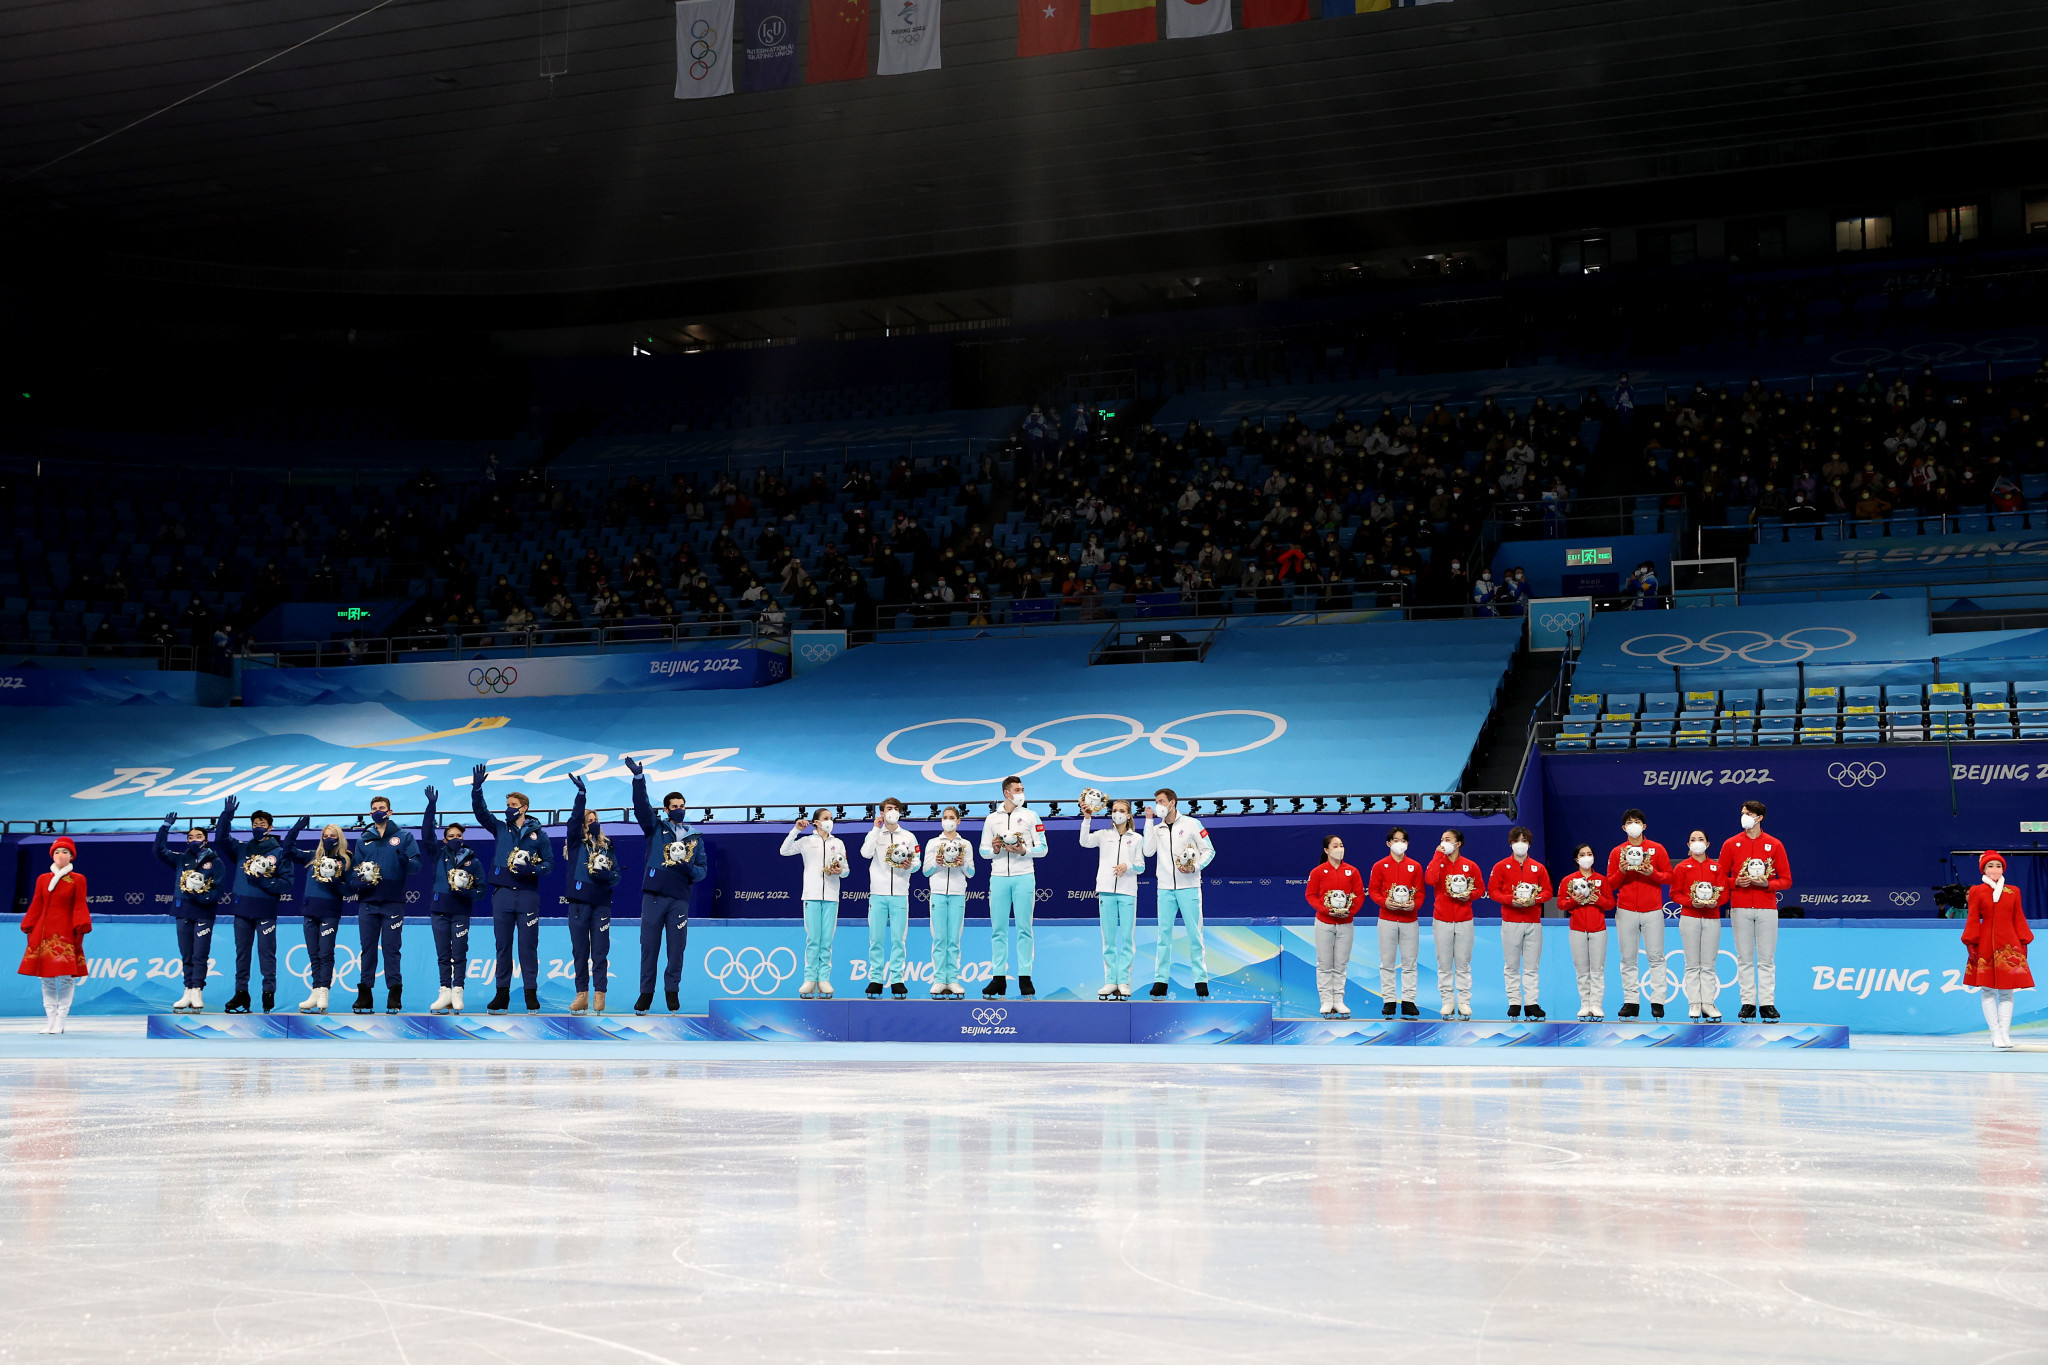 The medal ceremony for the team figure skating event at Beijing 2022 has yet to take place due to the uncertainty with regard to the Kamila Valieva case ©Getty Images